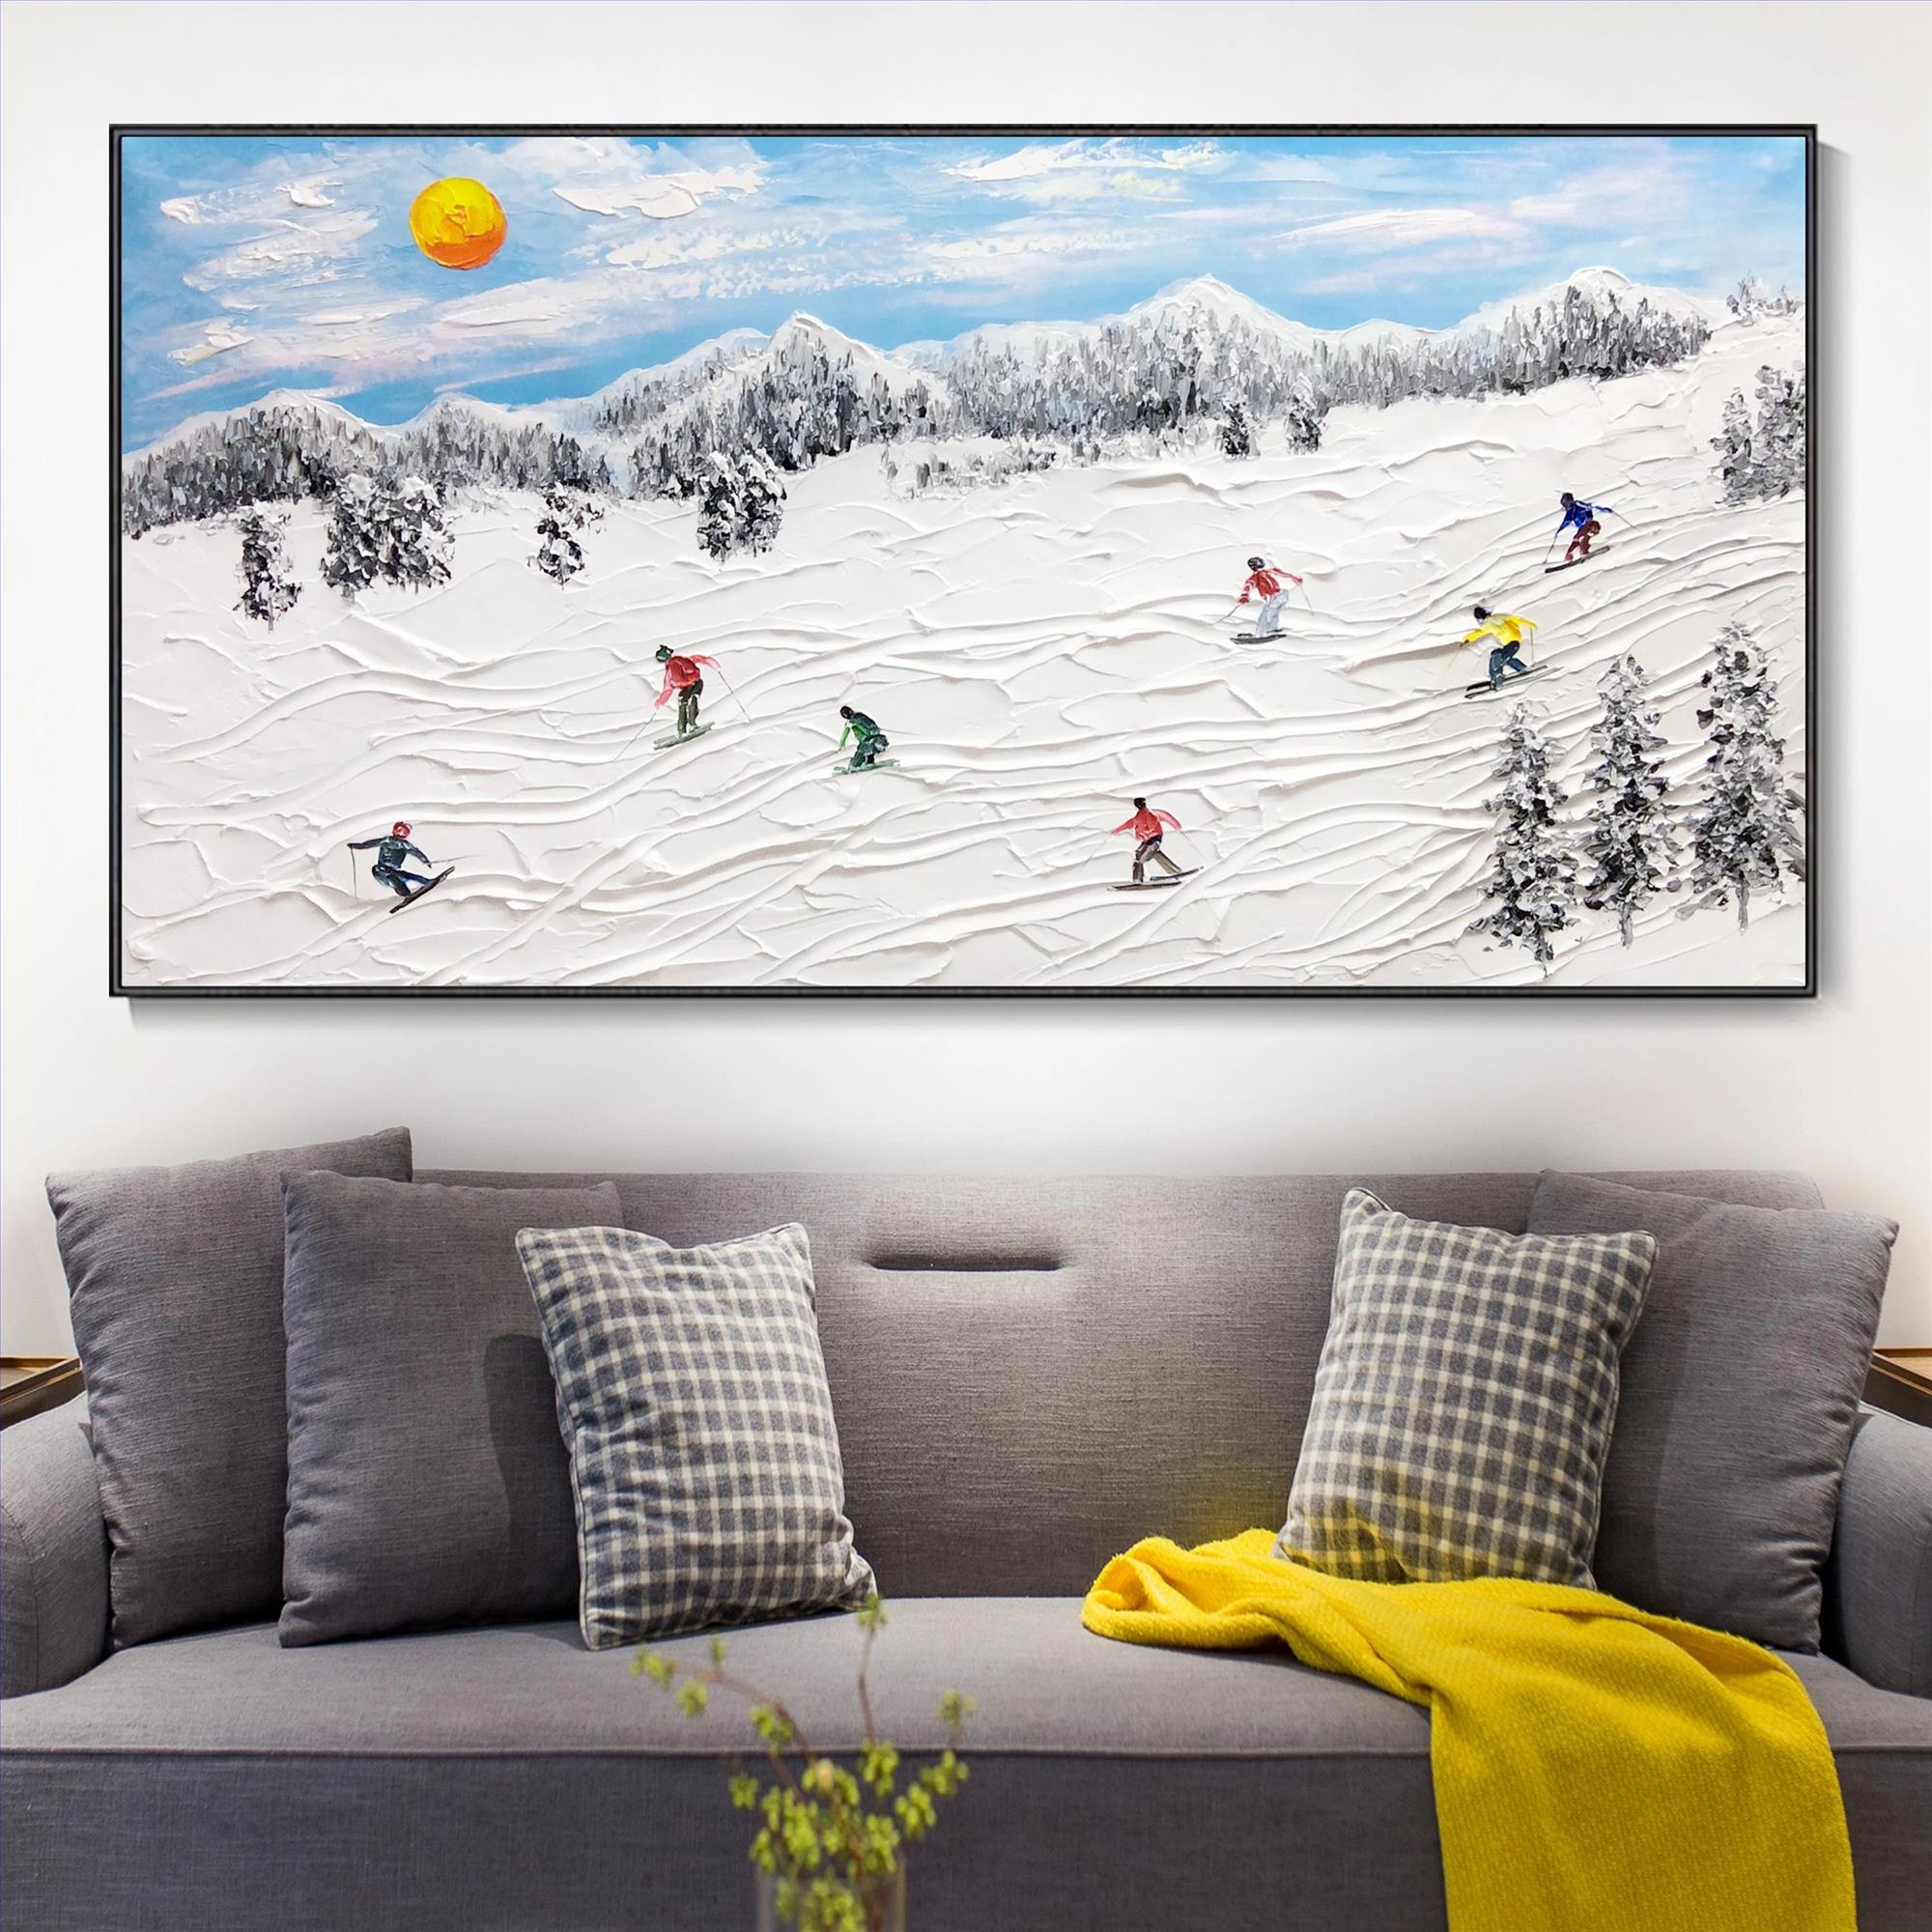 Skier on Snowy Mountain Wall Art Sport White Snow Skiing Room Decor by Knife 18 texture Oil Paintings